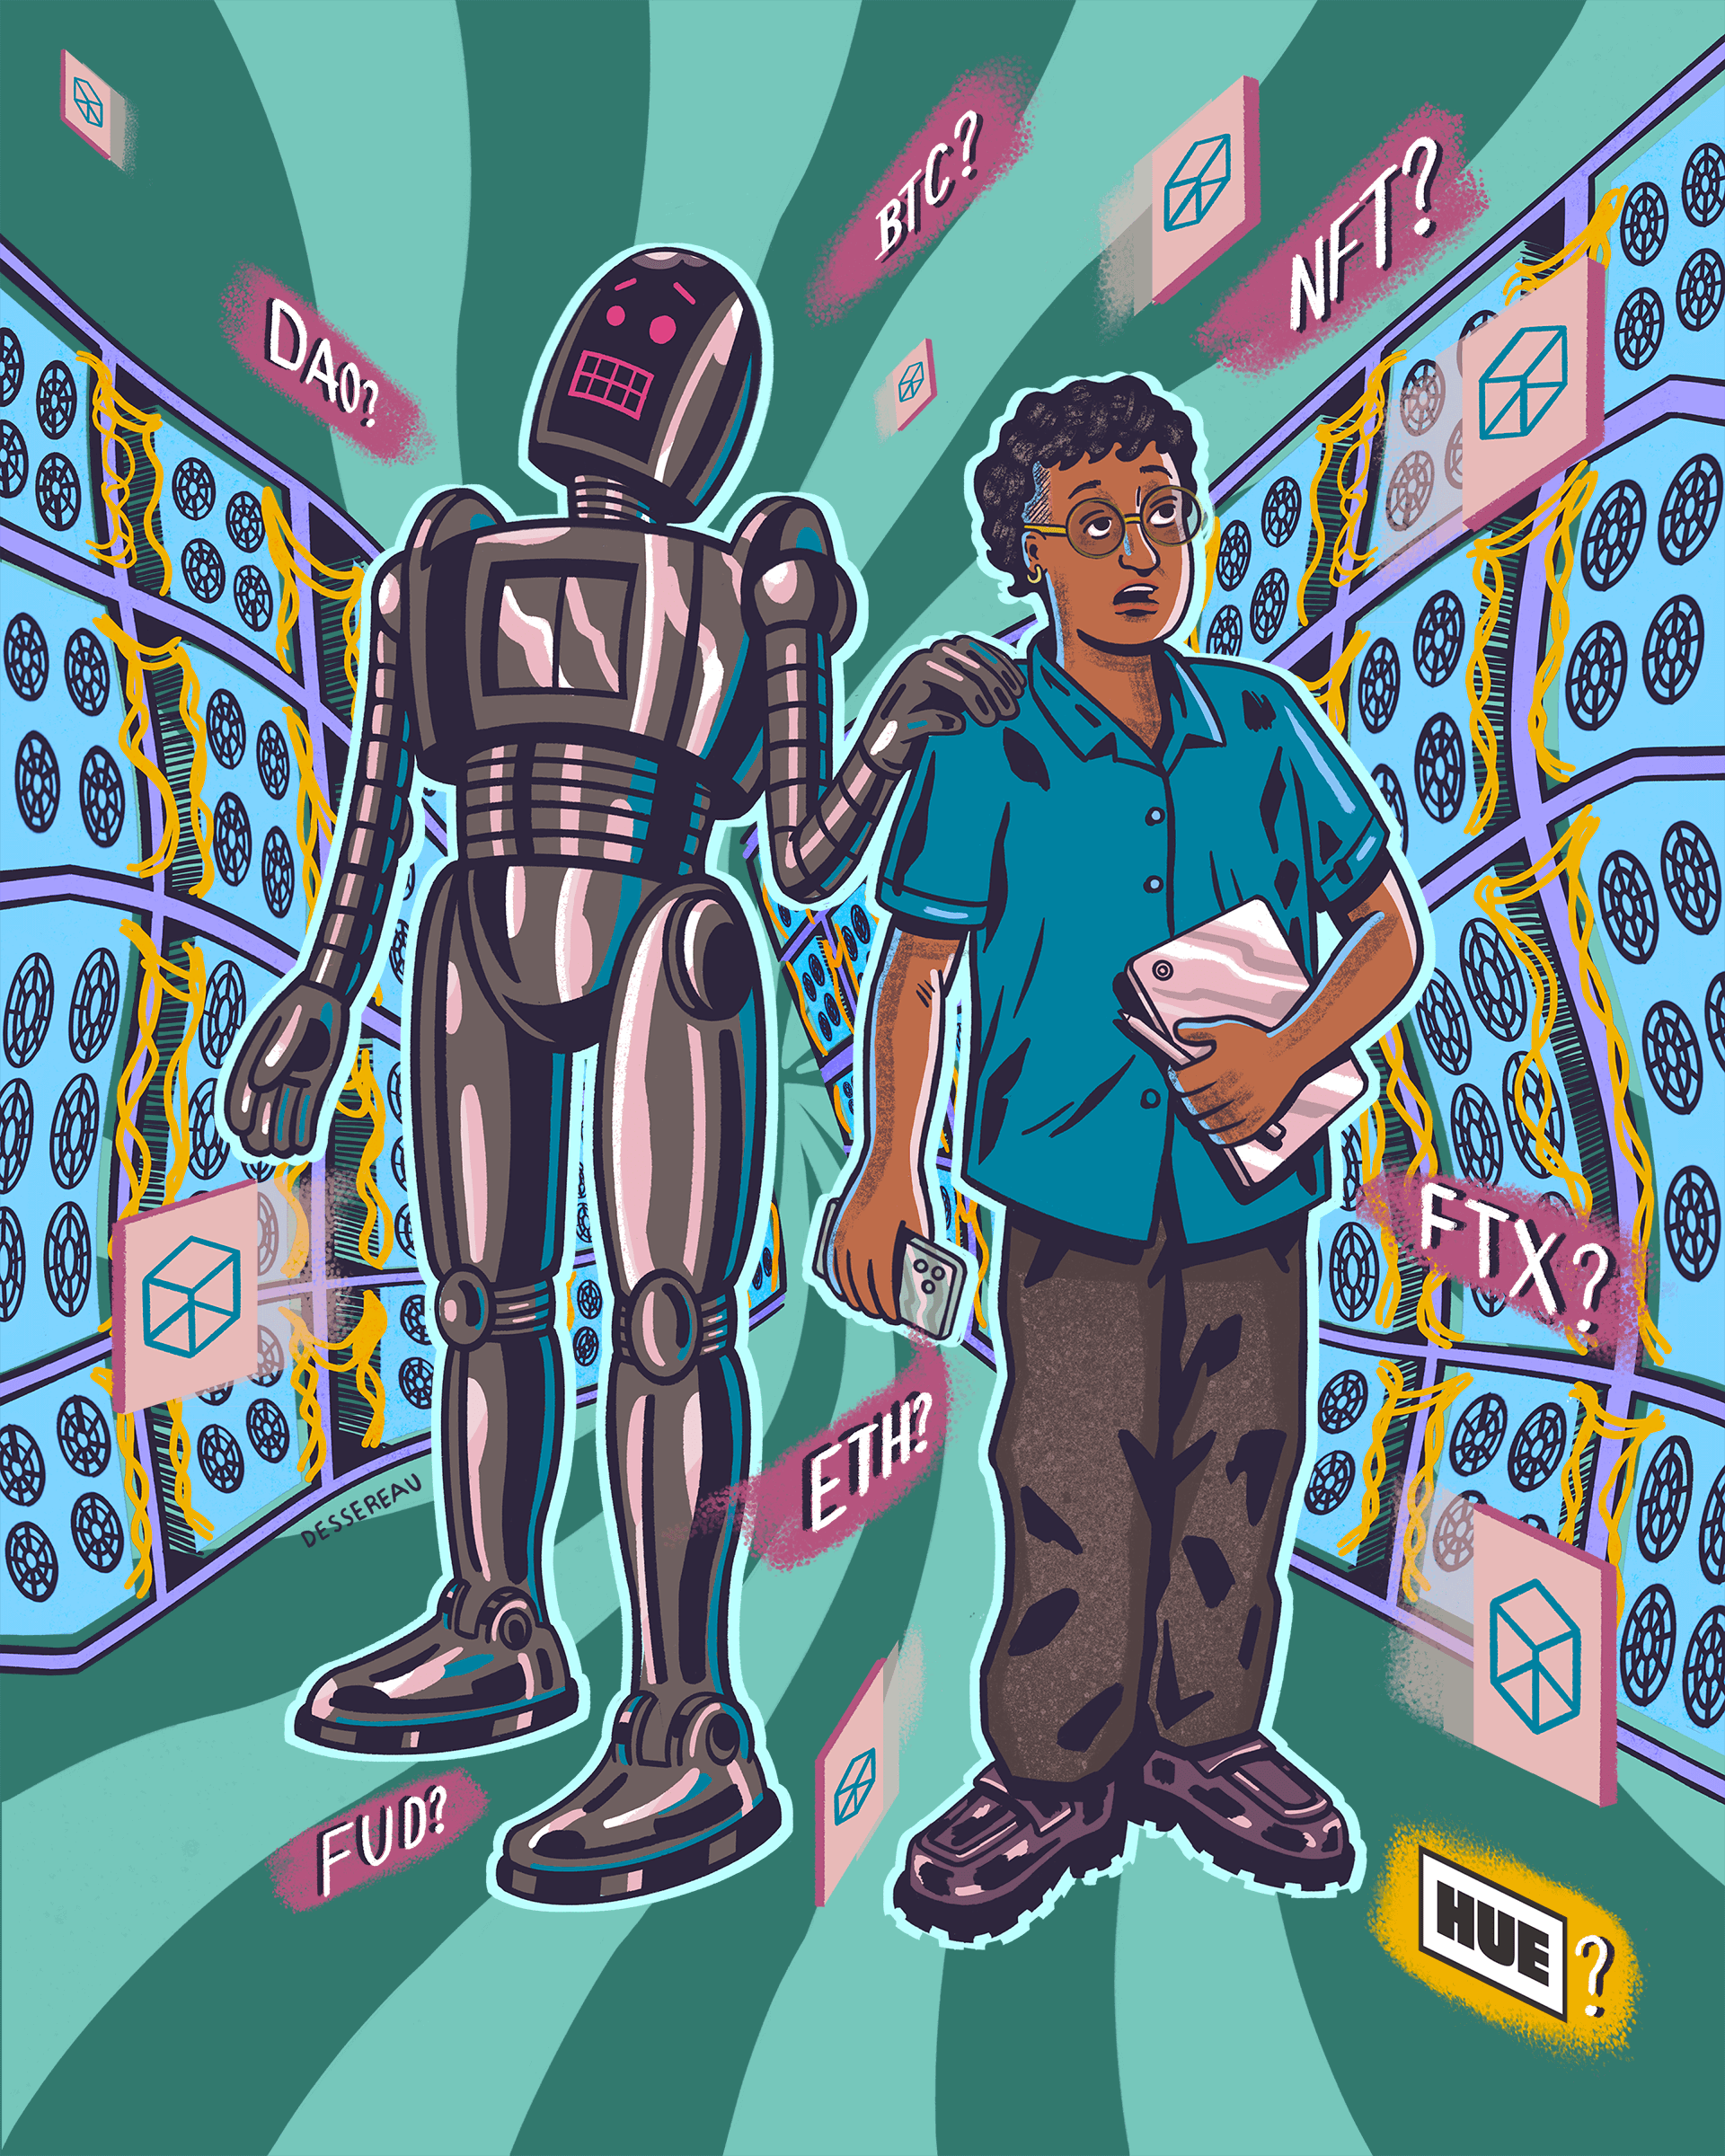 cover of Hue magazine featuring an illustration of a robot and man